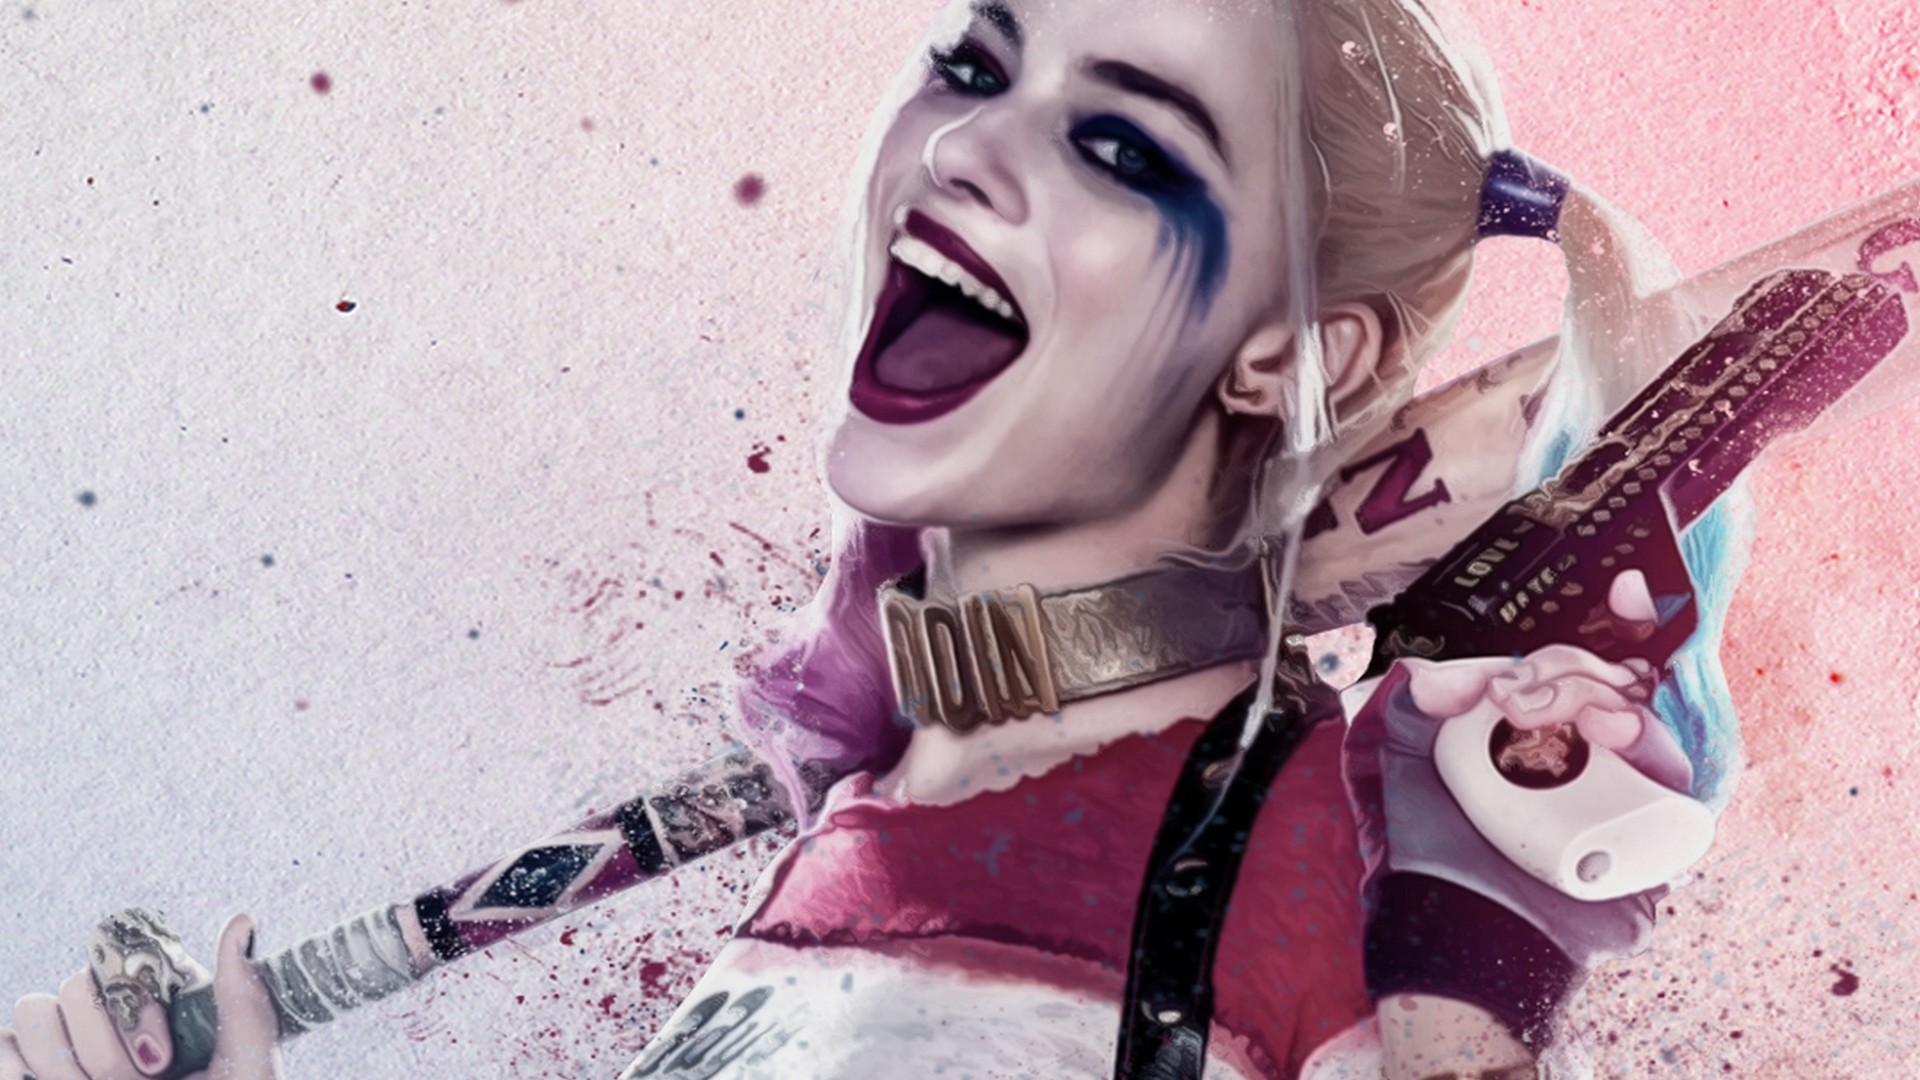 Harley Quinn Movie Desktop Backgrounds HD with resolution 1920X1080 pixel. You can use this wallpaper as background for your desktop Computer Screensavers, Android or iPhone smartphones